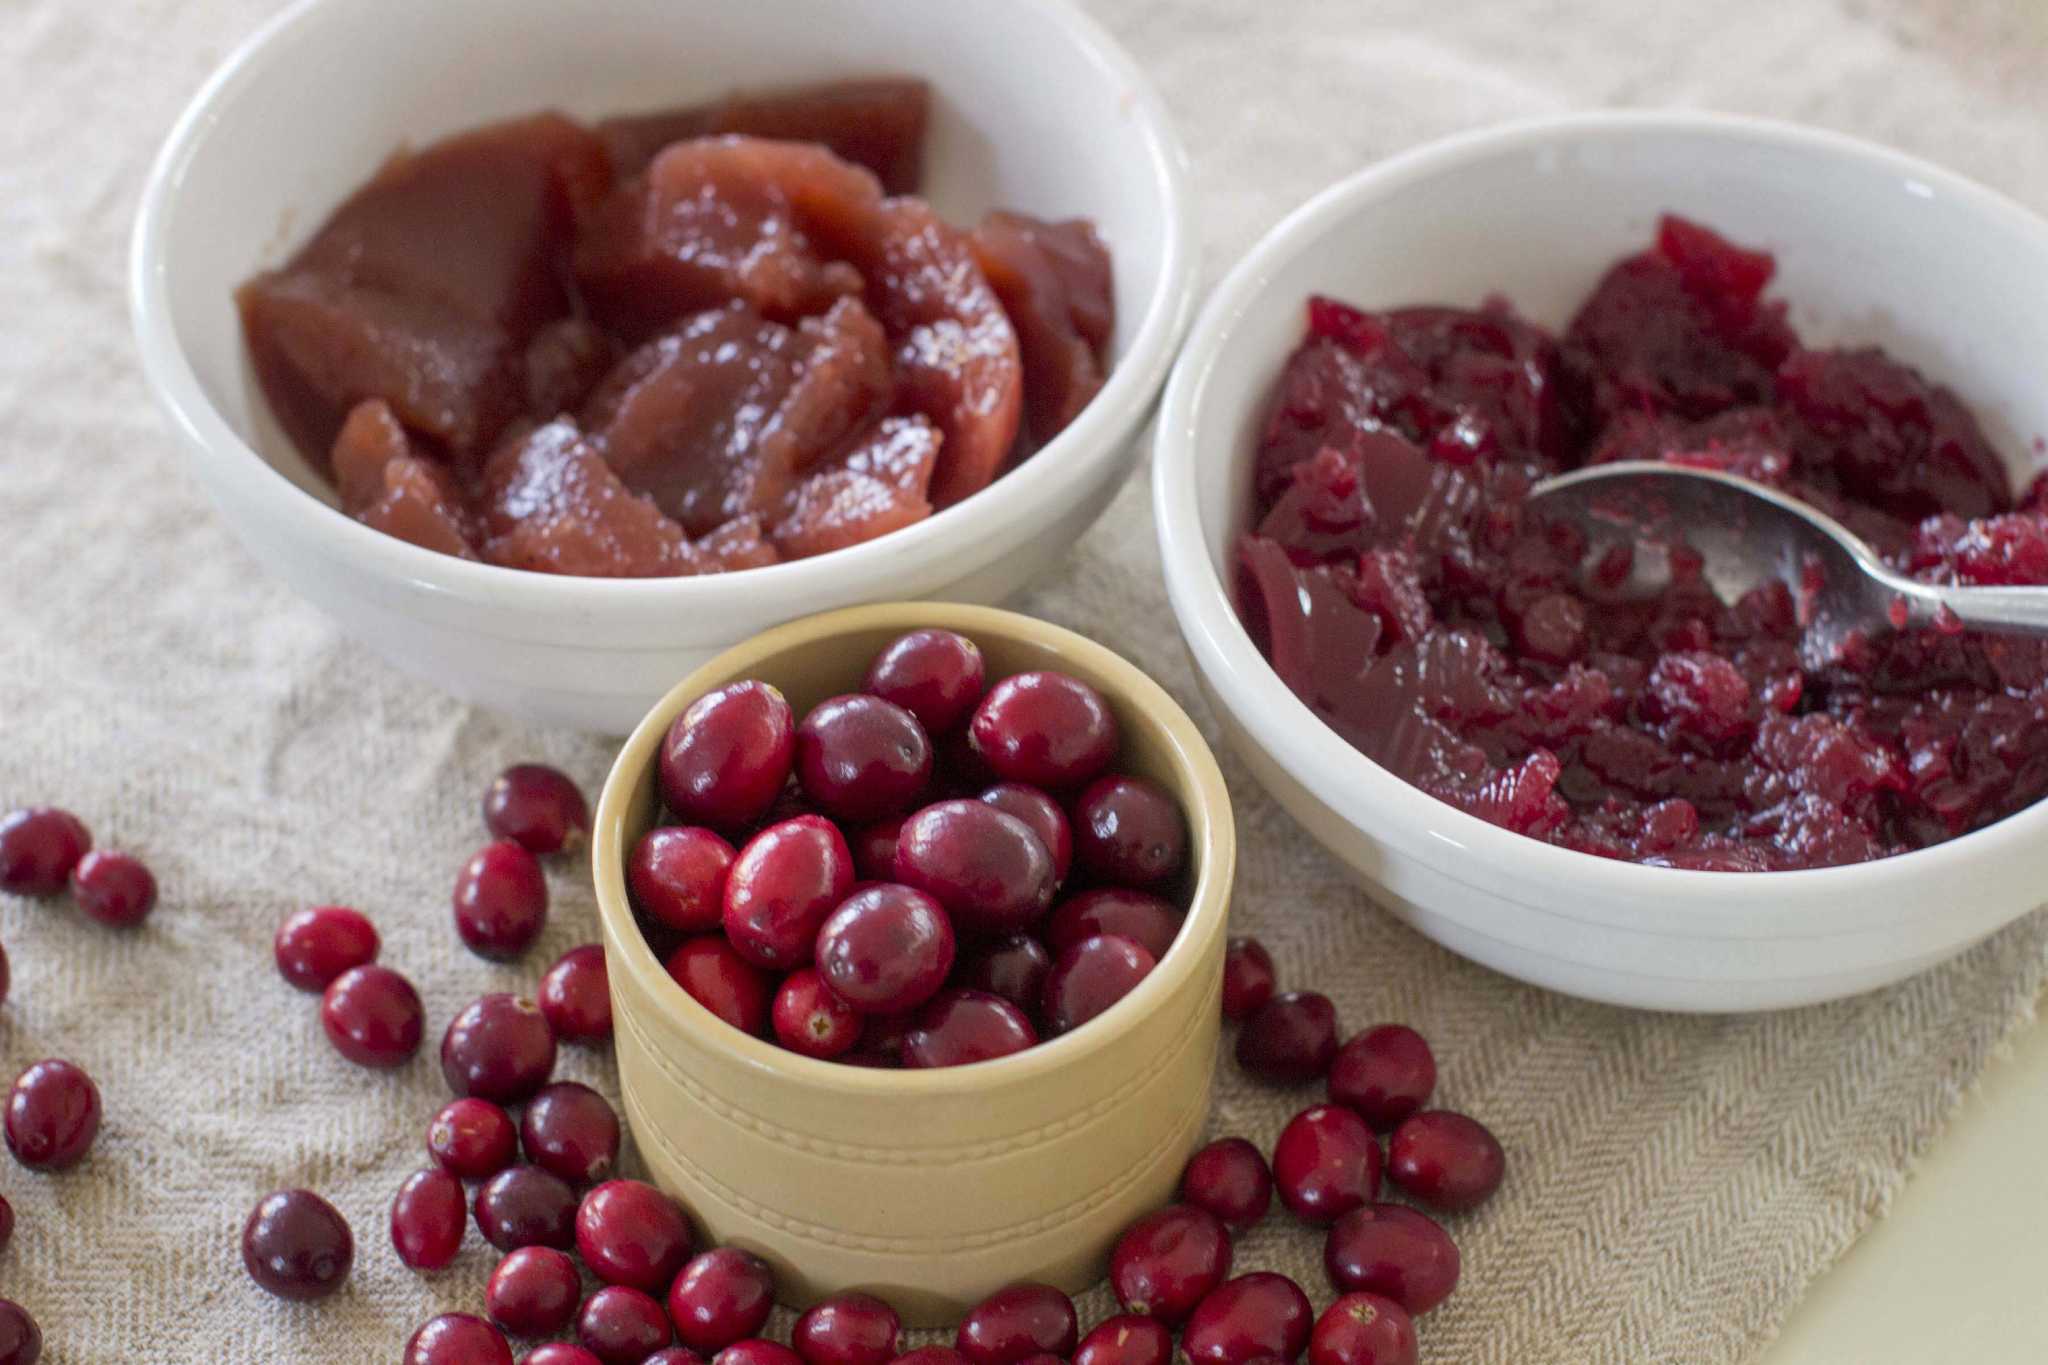 Homemade cranberry sauce can benefit from variations.